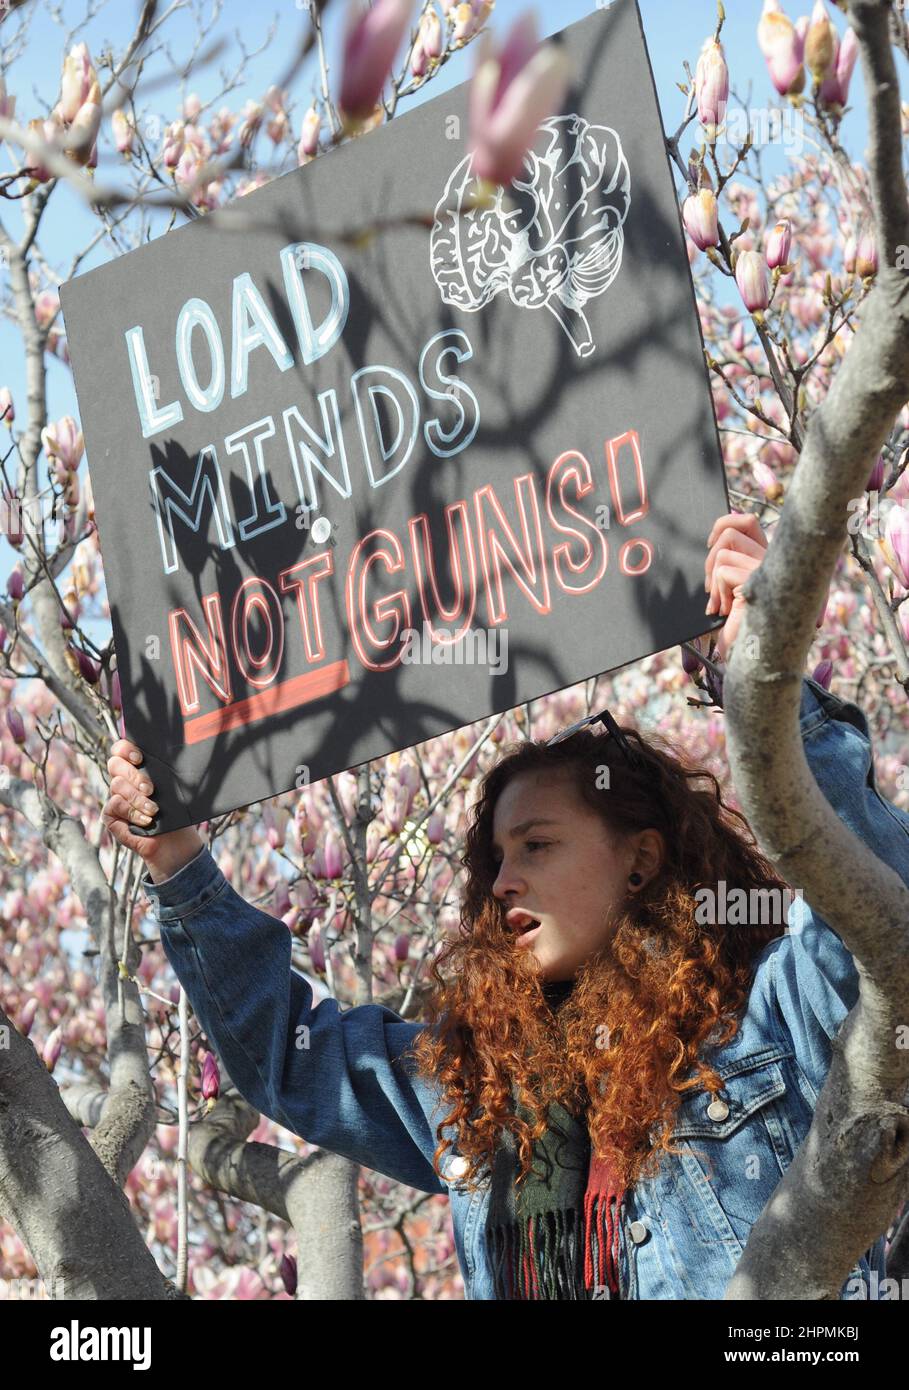 March for Our lives protest in Washington DC Stock Photo